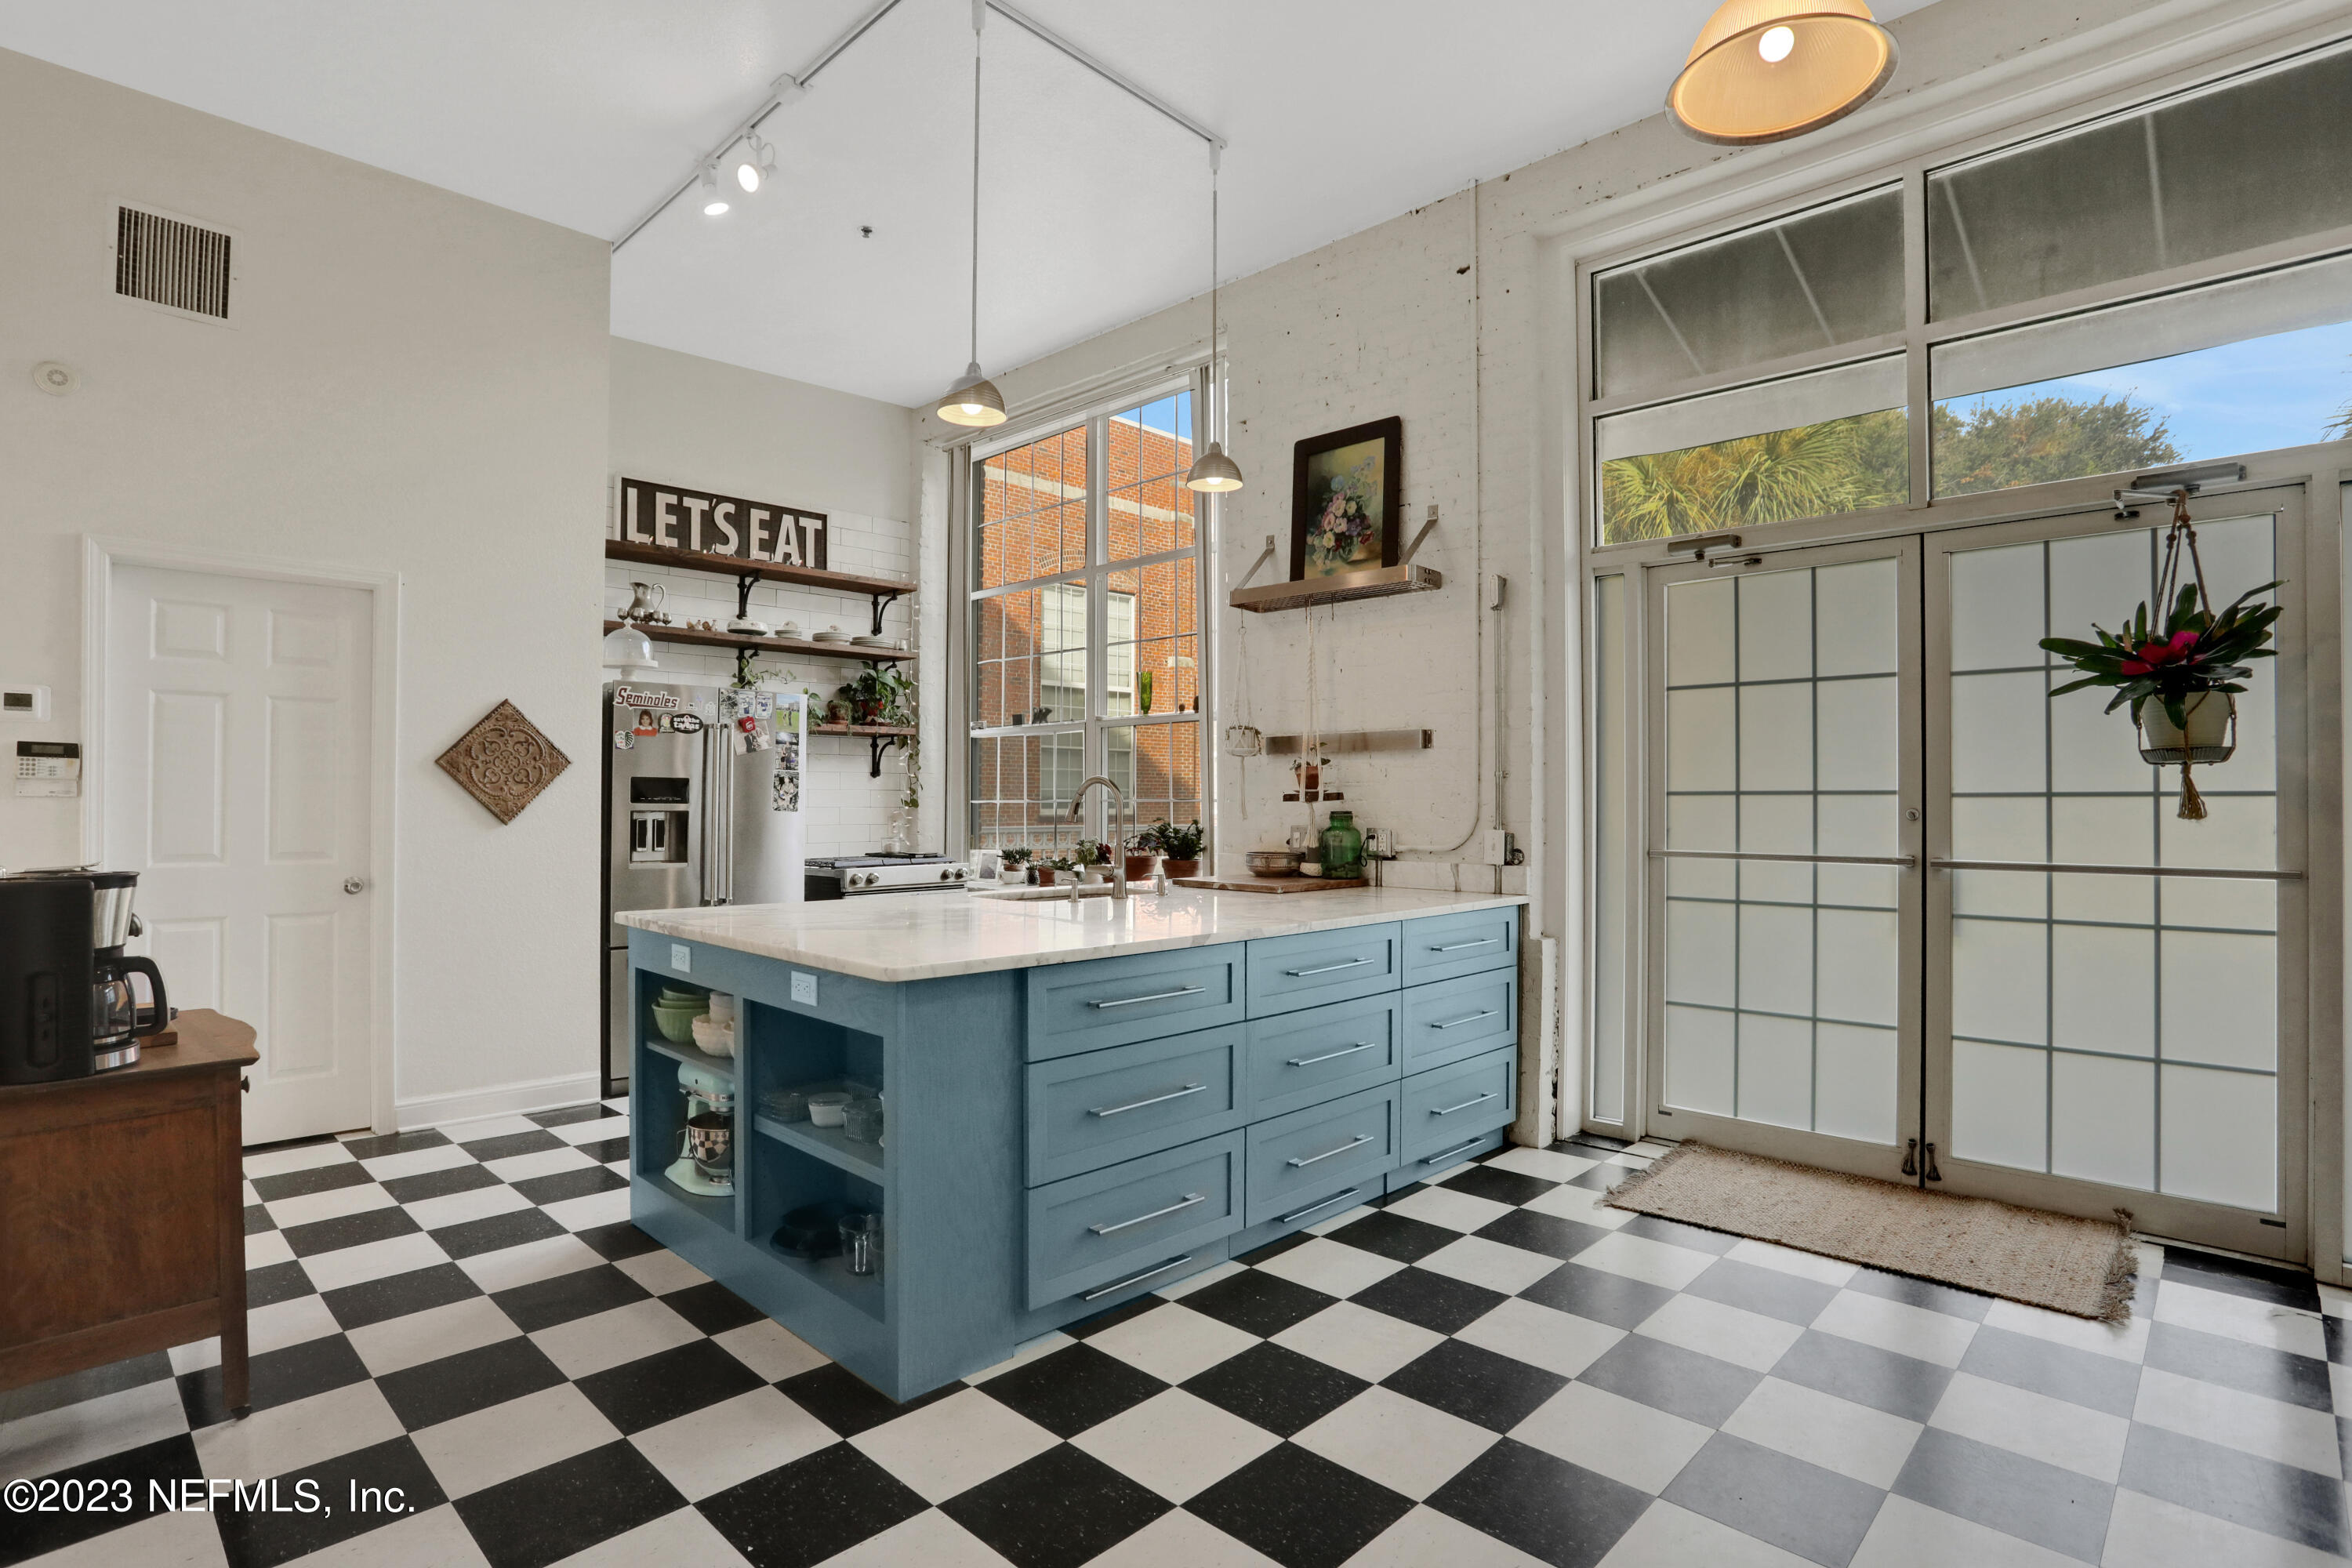 a kitchen with a checkered floor and white cabinets